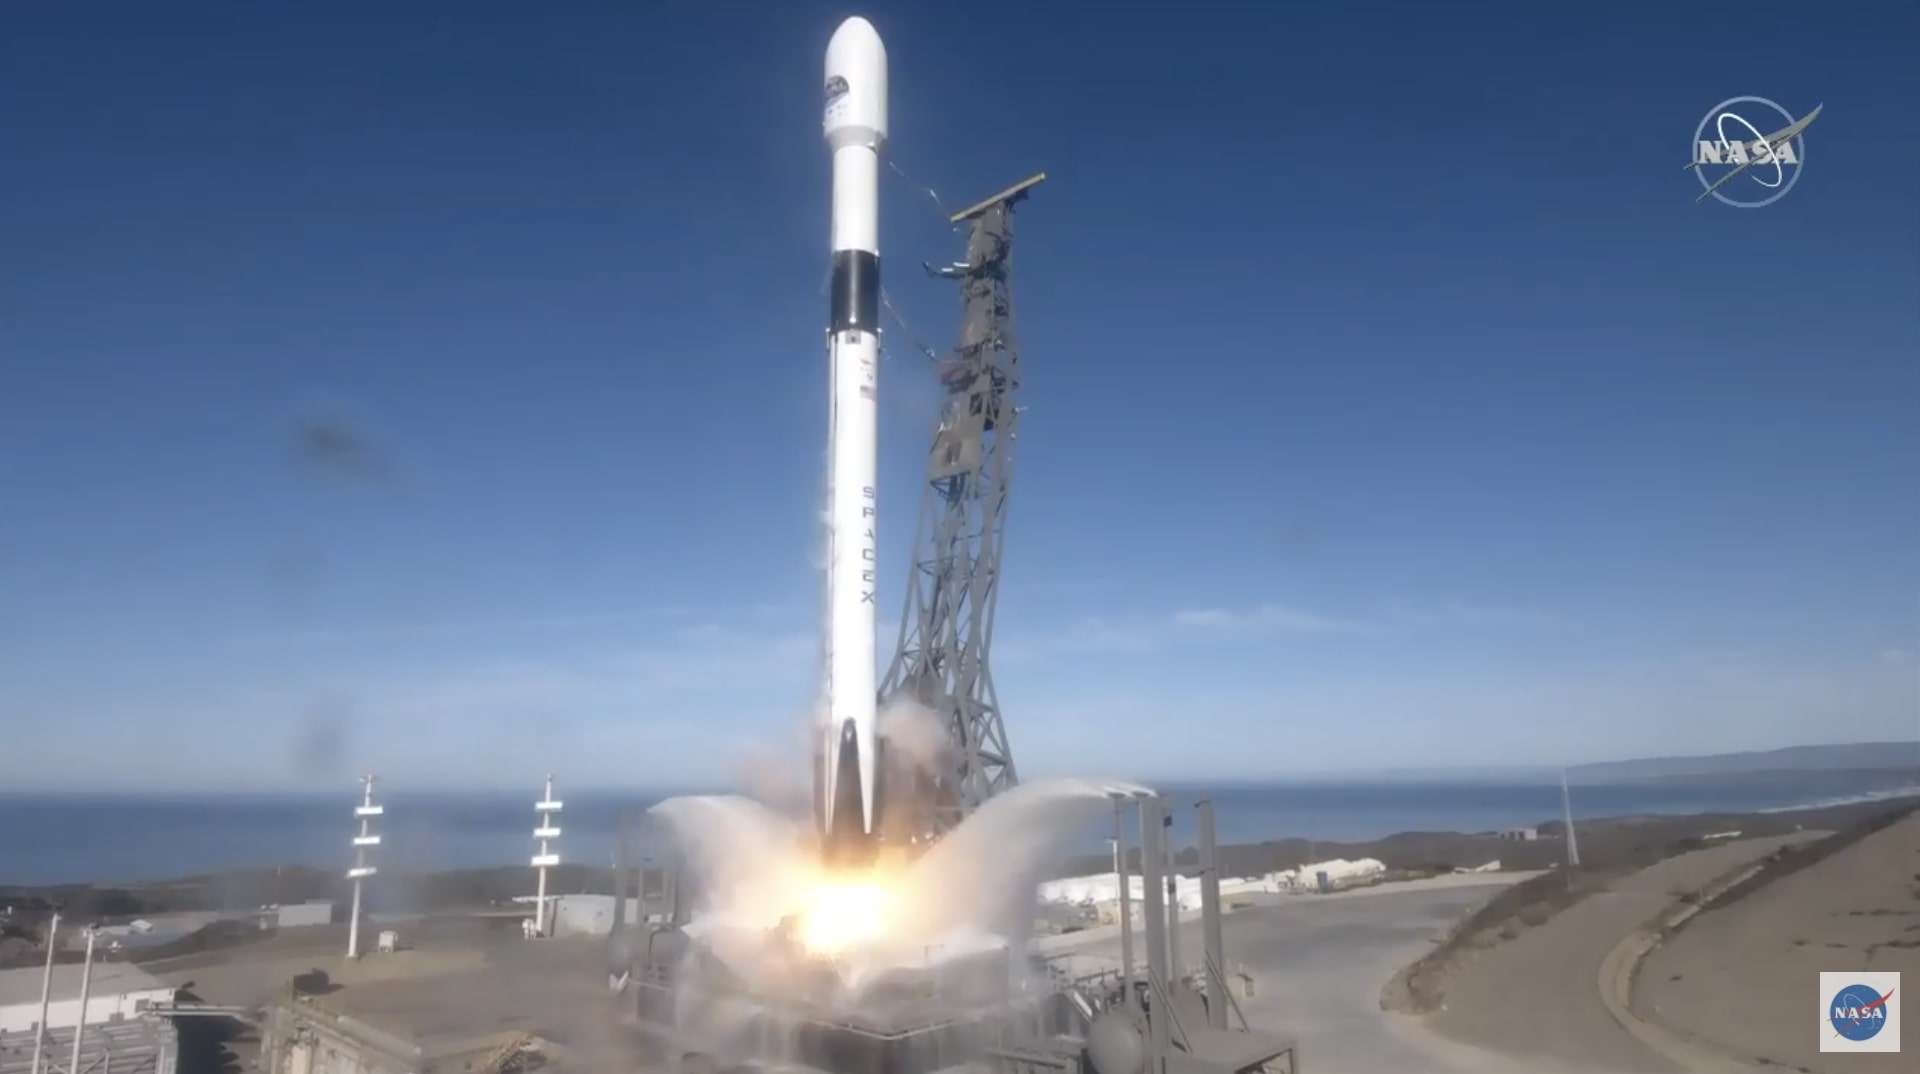 Elon Musk's SpaceX wins contract to launch NASA's astrophysics mission